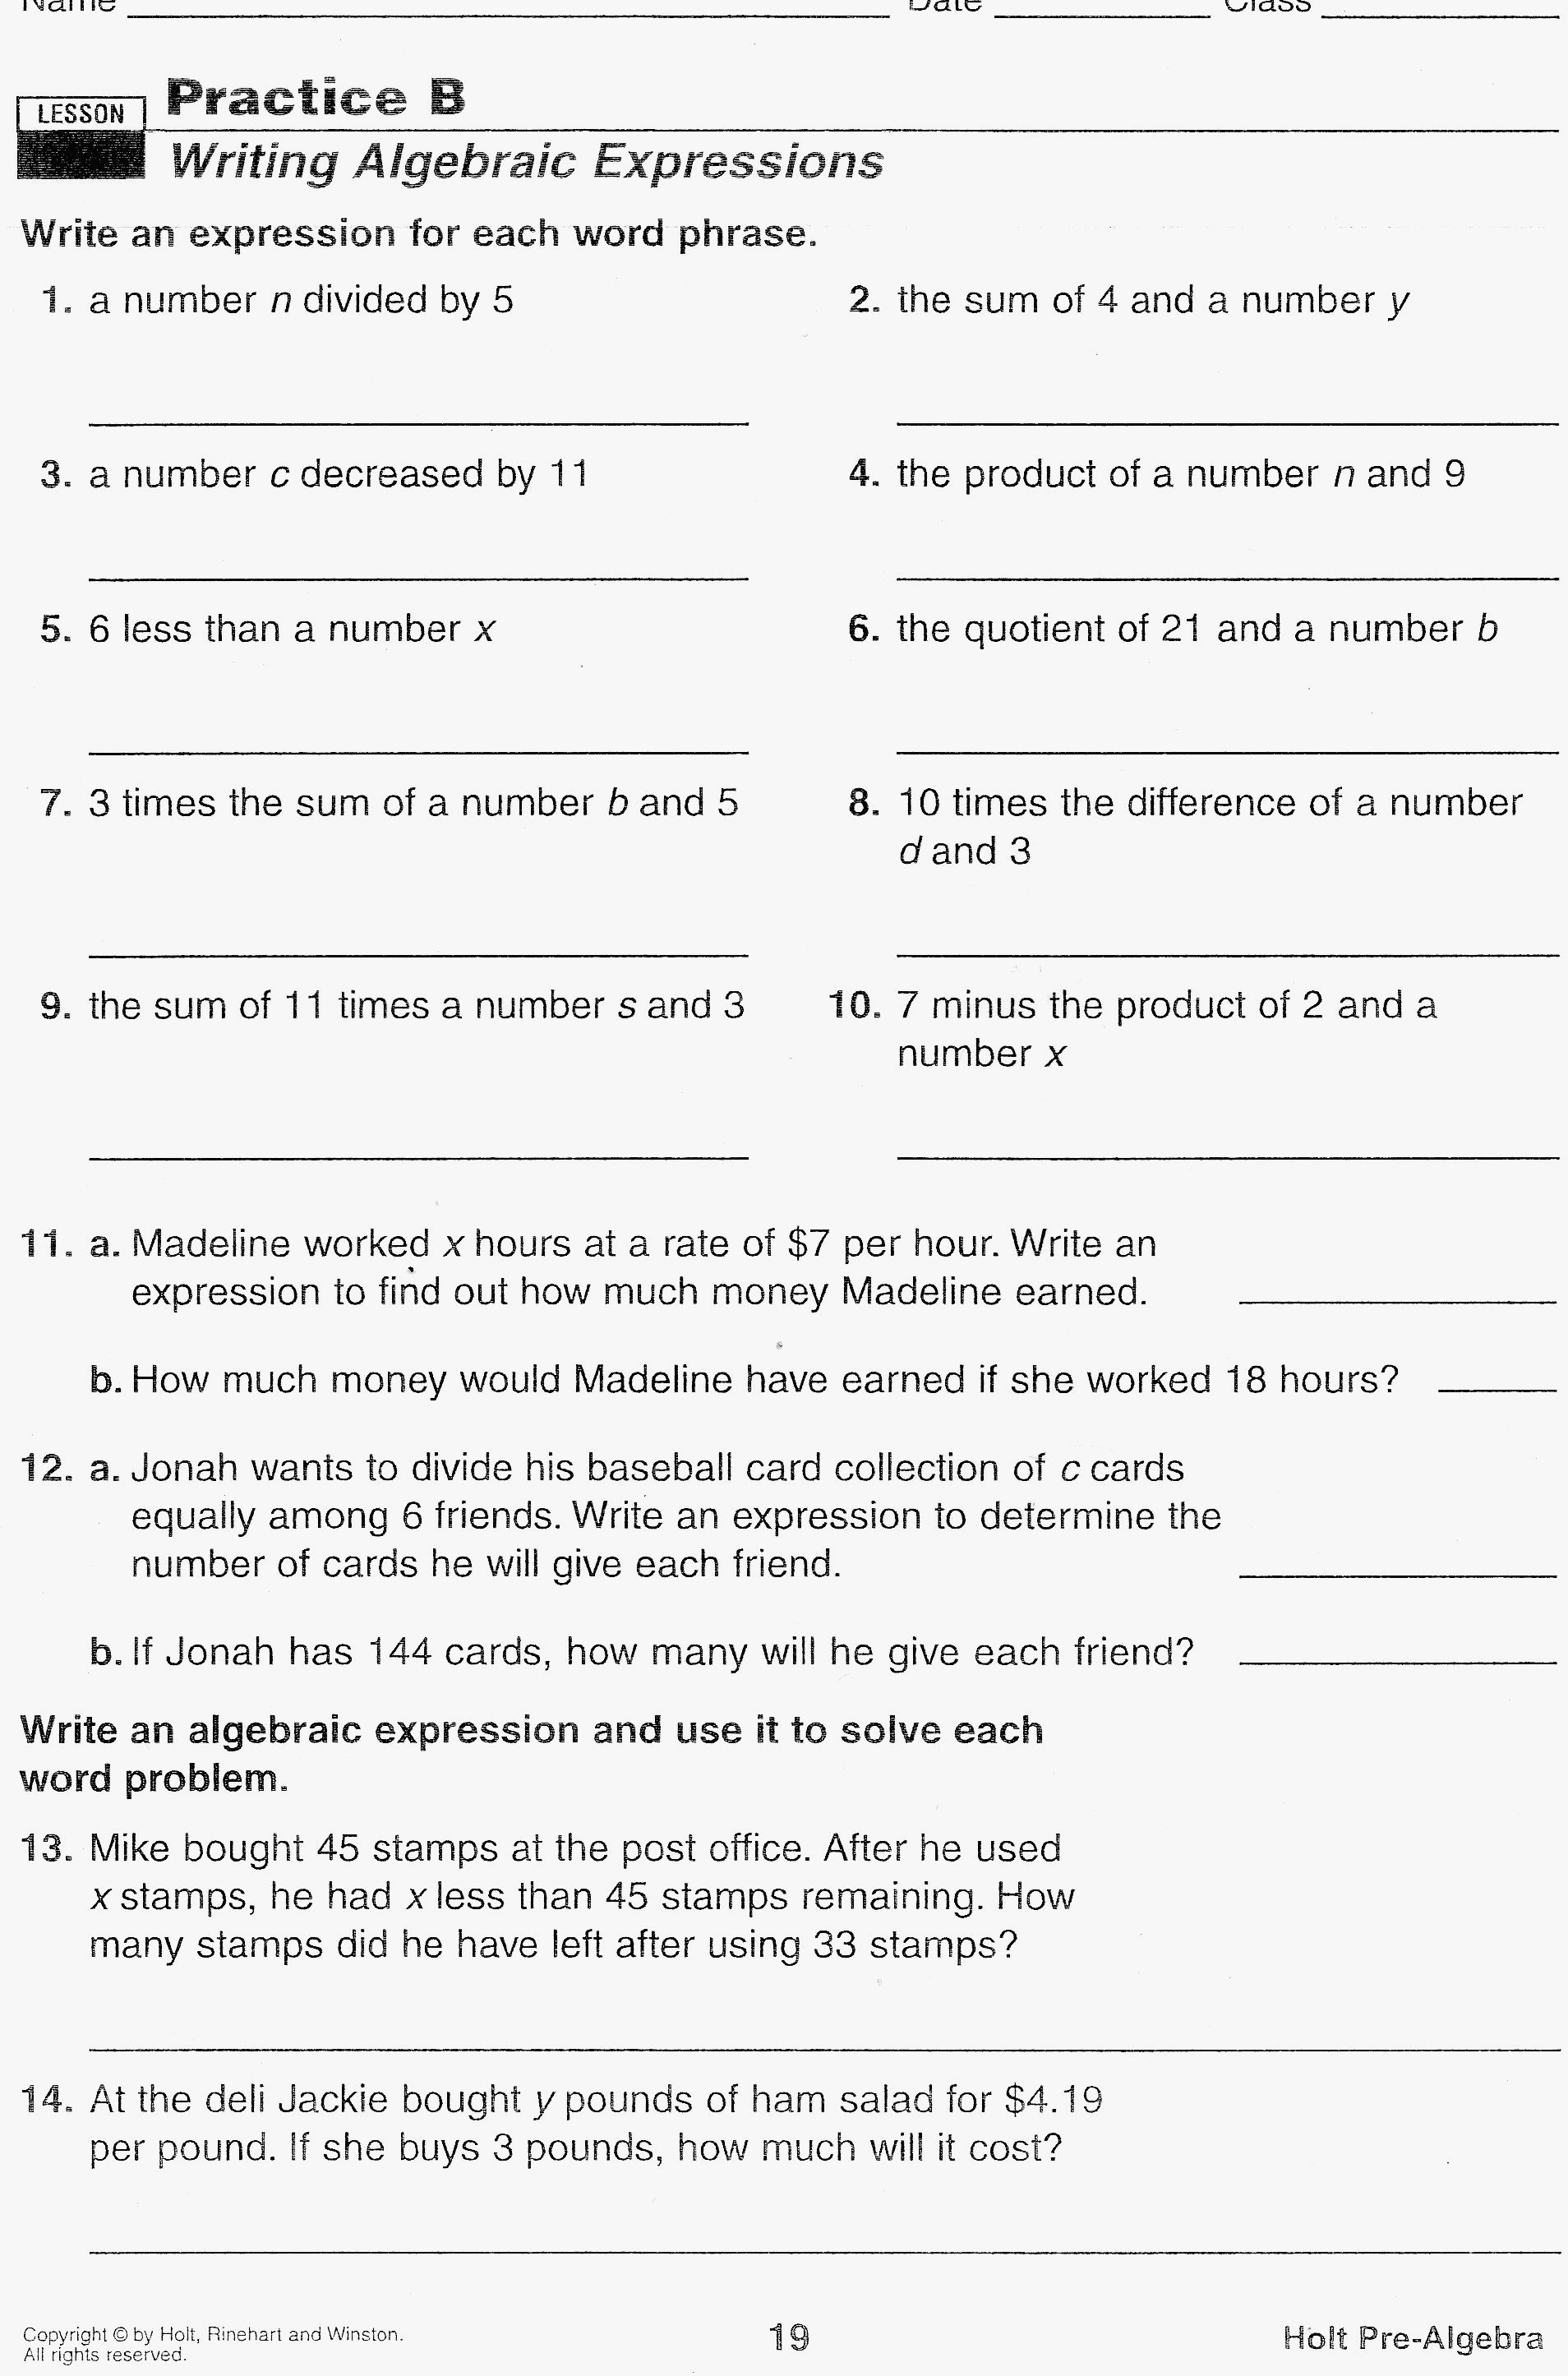 Lesson 6 Homework Practice Awesome Holt Mathematics Worksheets Along With Holt Mathematics Worksheets With Answers